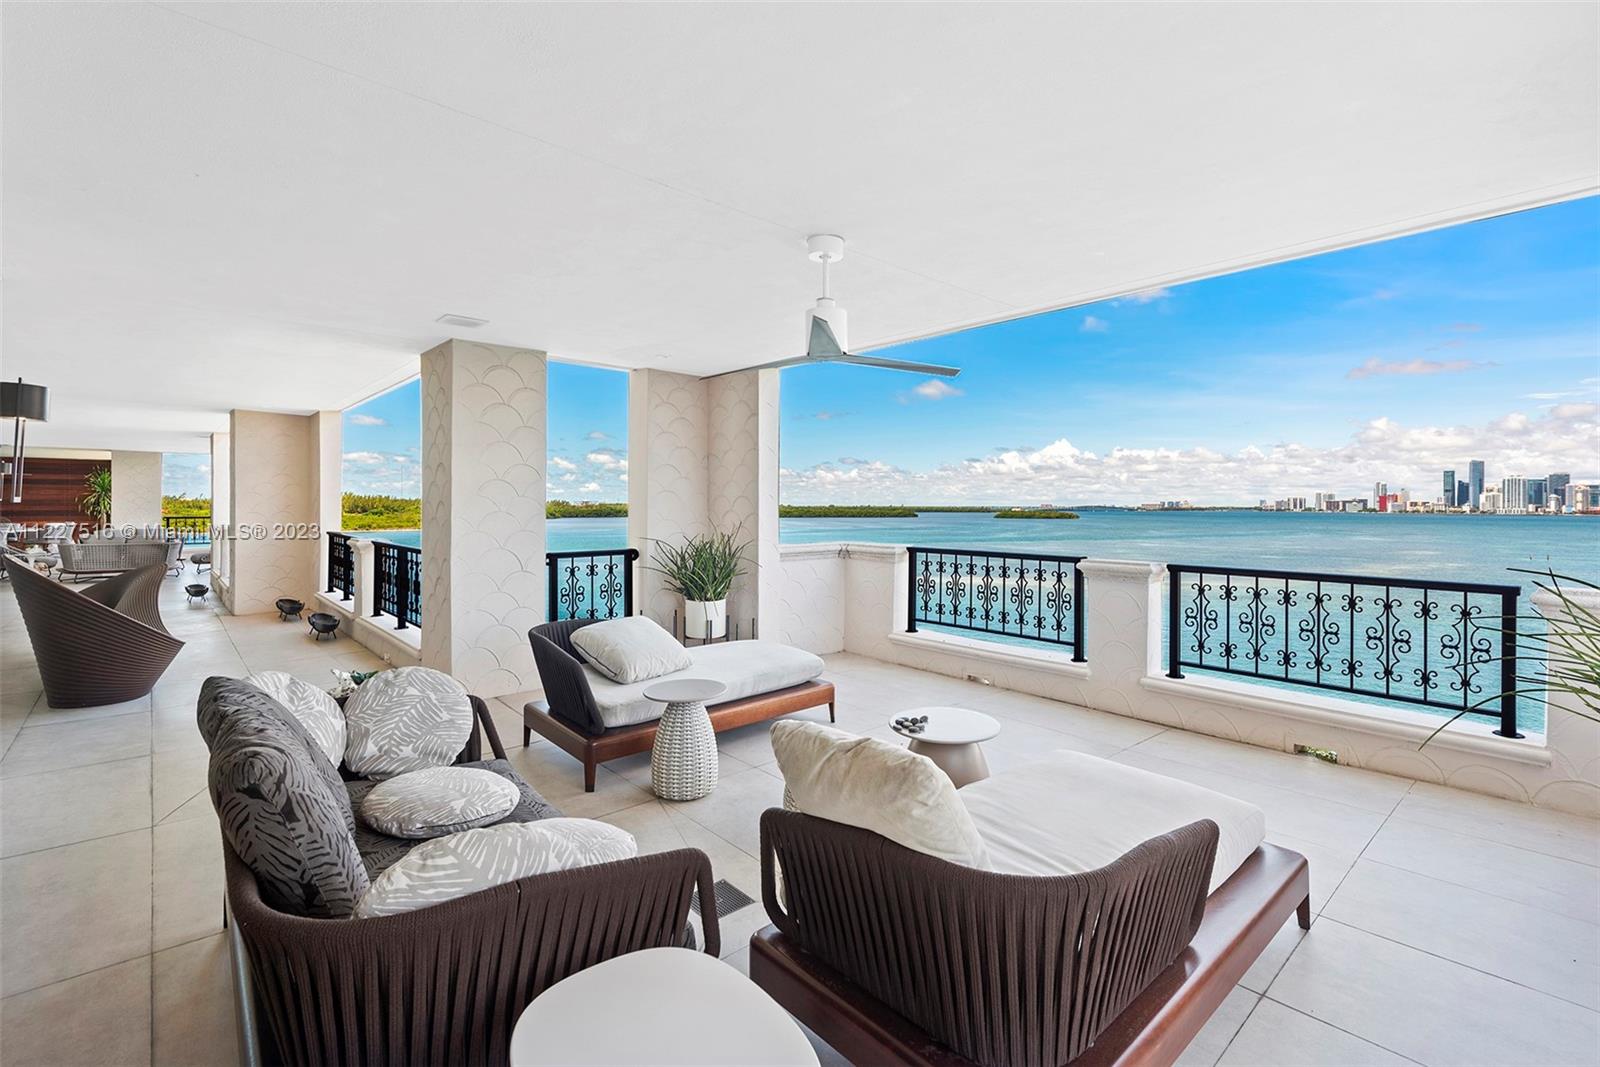 This masterfully crafted unit was meticulously gutted and reconfigured into an open-plan, modern condominium by creative director Sofia Joelsson. The flow-through unit overlooks the Atlantic Ocean, Biscayne Bay and Downtown Miami and it is surrounded by a deep wraparound balcony with spaces for entertaining and other outdoor activities. The inspiration for the project was a modern vibe with a focus on art with approximately 6,000 sqft living area, 4 bedrooms, 4.5 baths, porcelain concrete style floors, home theater, open kitchen with postcard views of the Miami Skyline, plus a custom walnut wet bar. In the master suite, the view looks straight east for the perfect sunrise and a one of kind master bathroom.